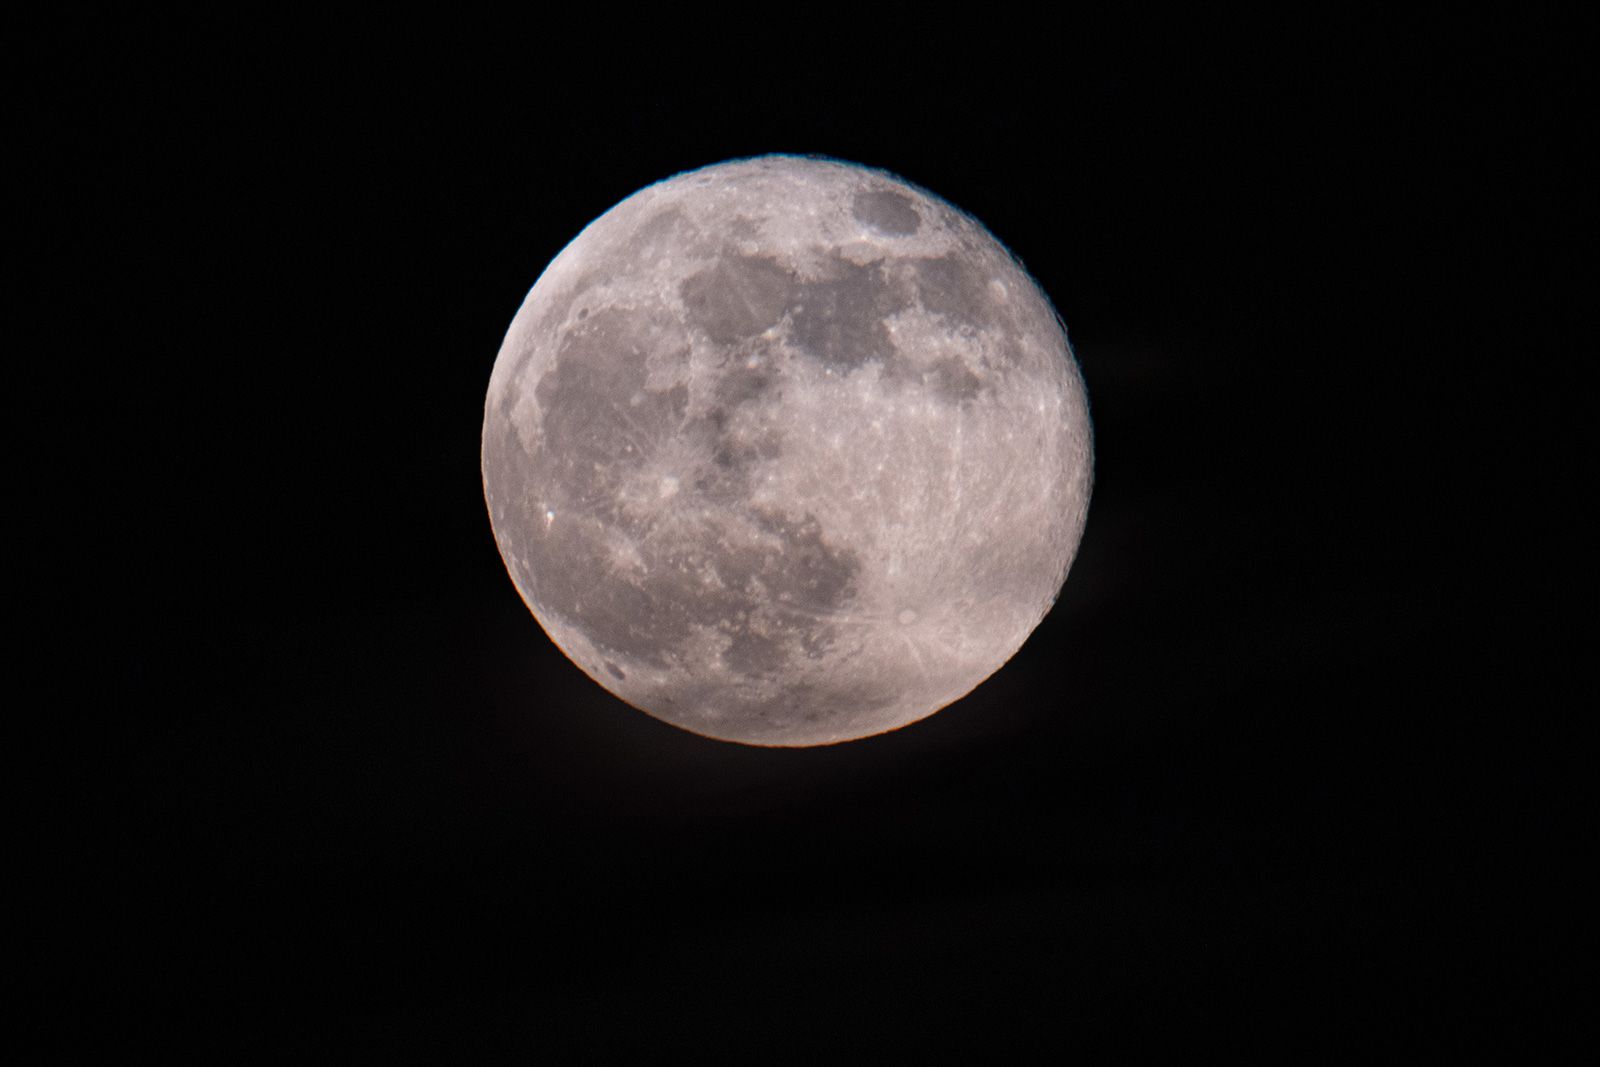 April's pink full moon will shine bright tonight - here's how to see it